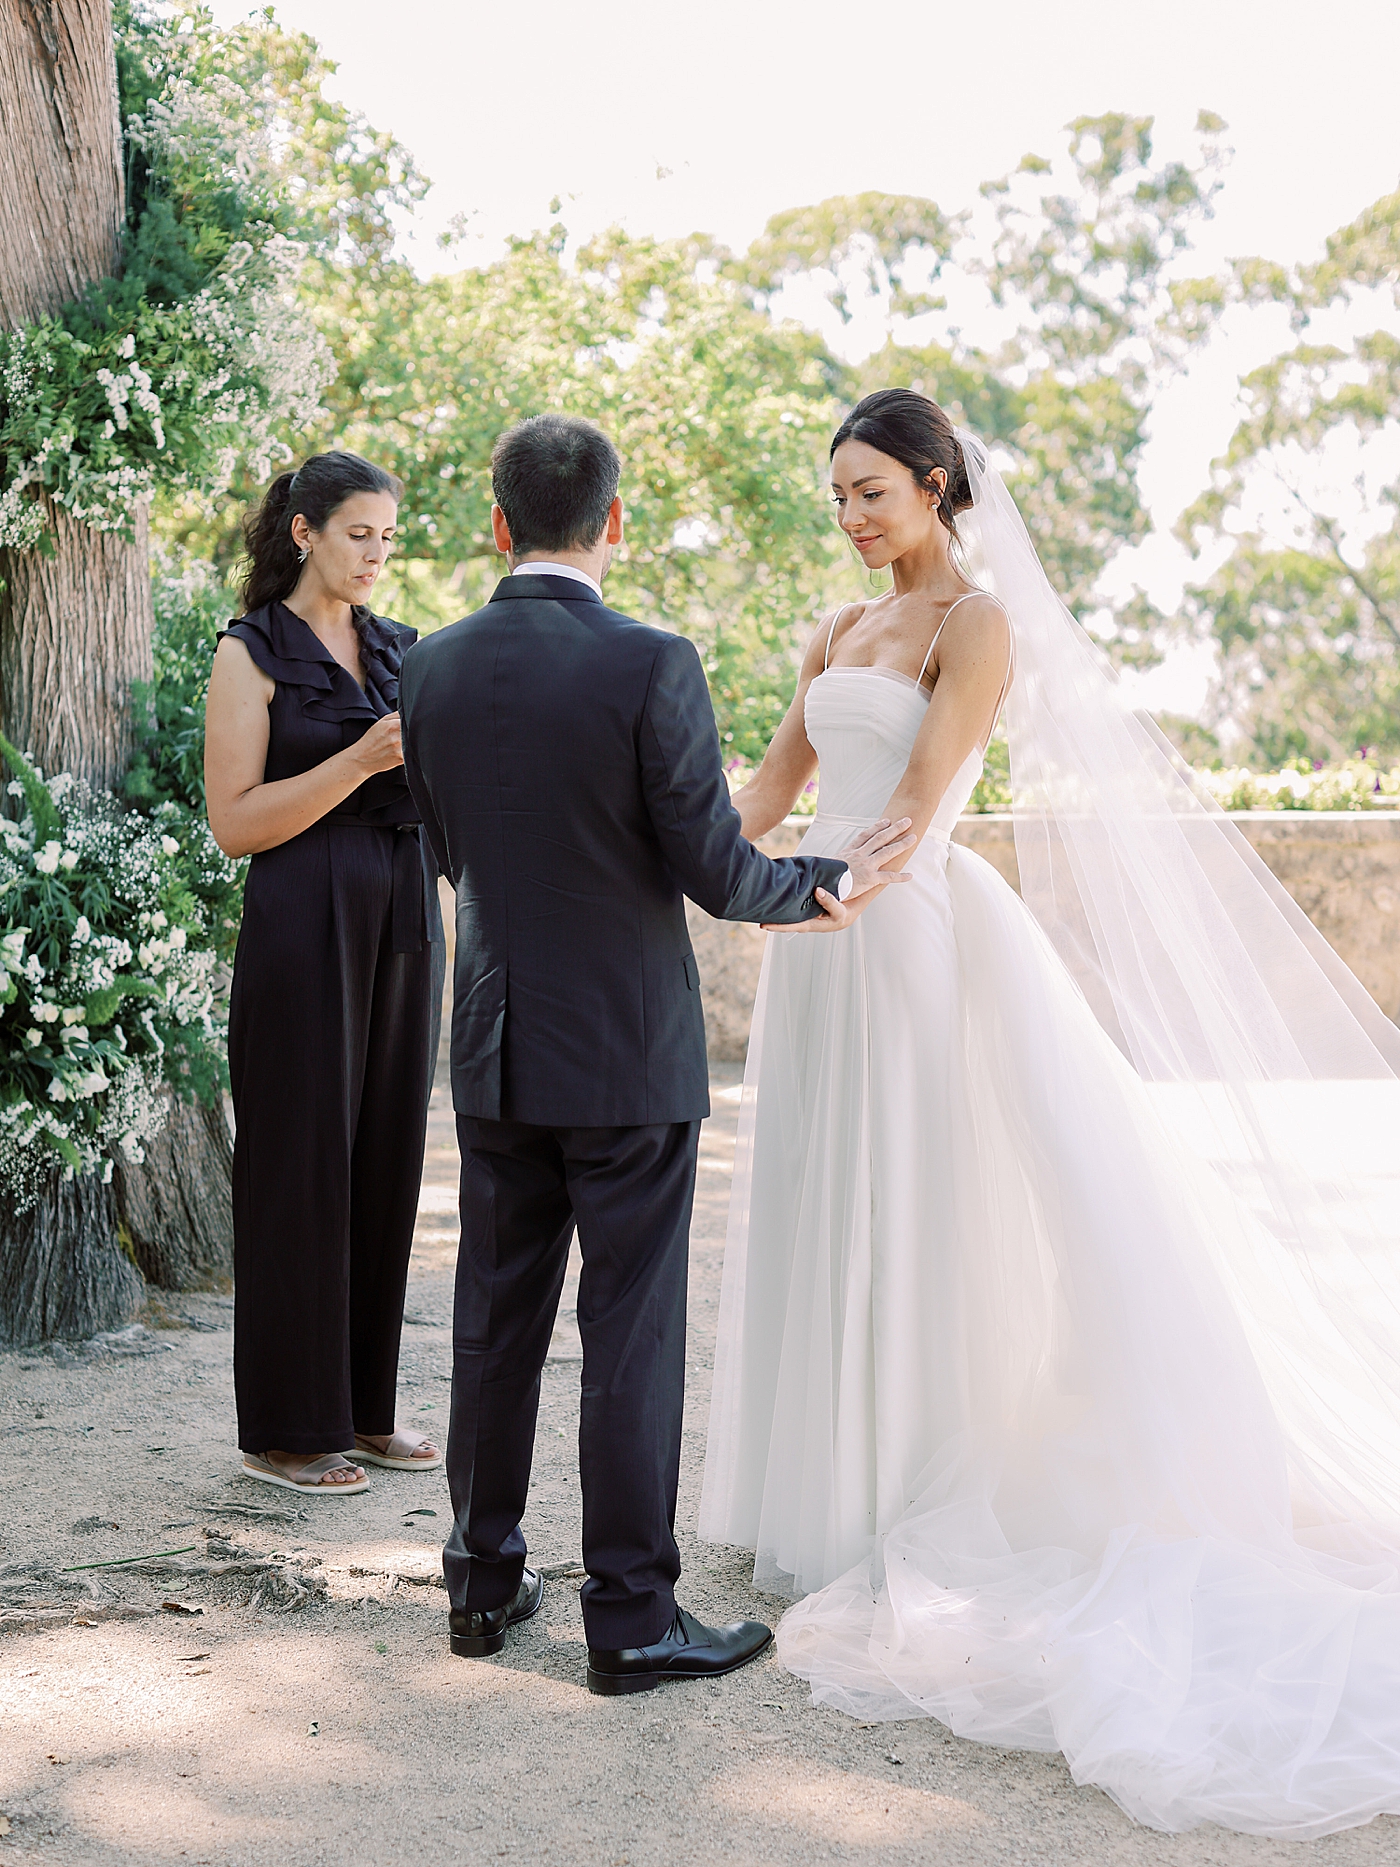 Bride and groom during their ceremony | Image by Diane Sotero Photography